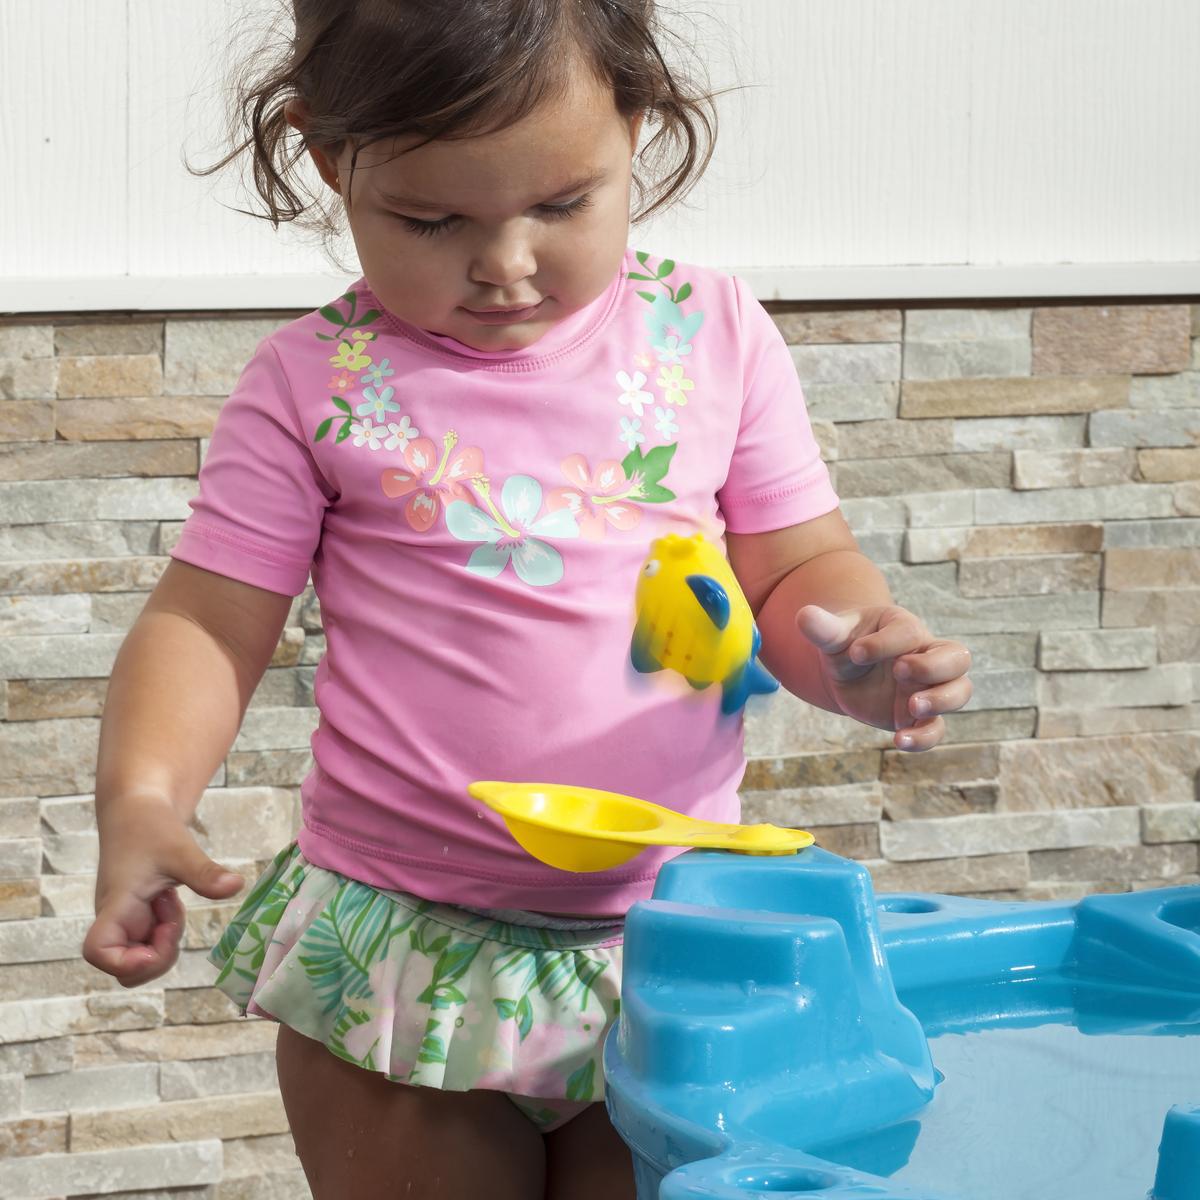 Step2 Spill and Splash Seaway Water Table